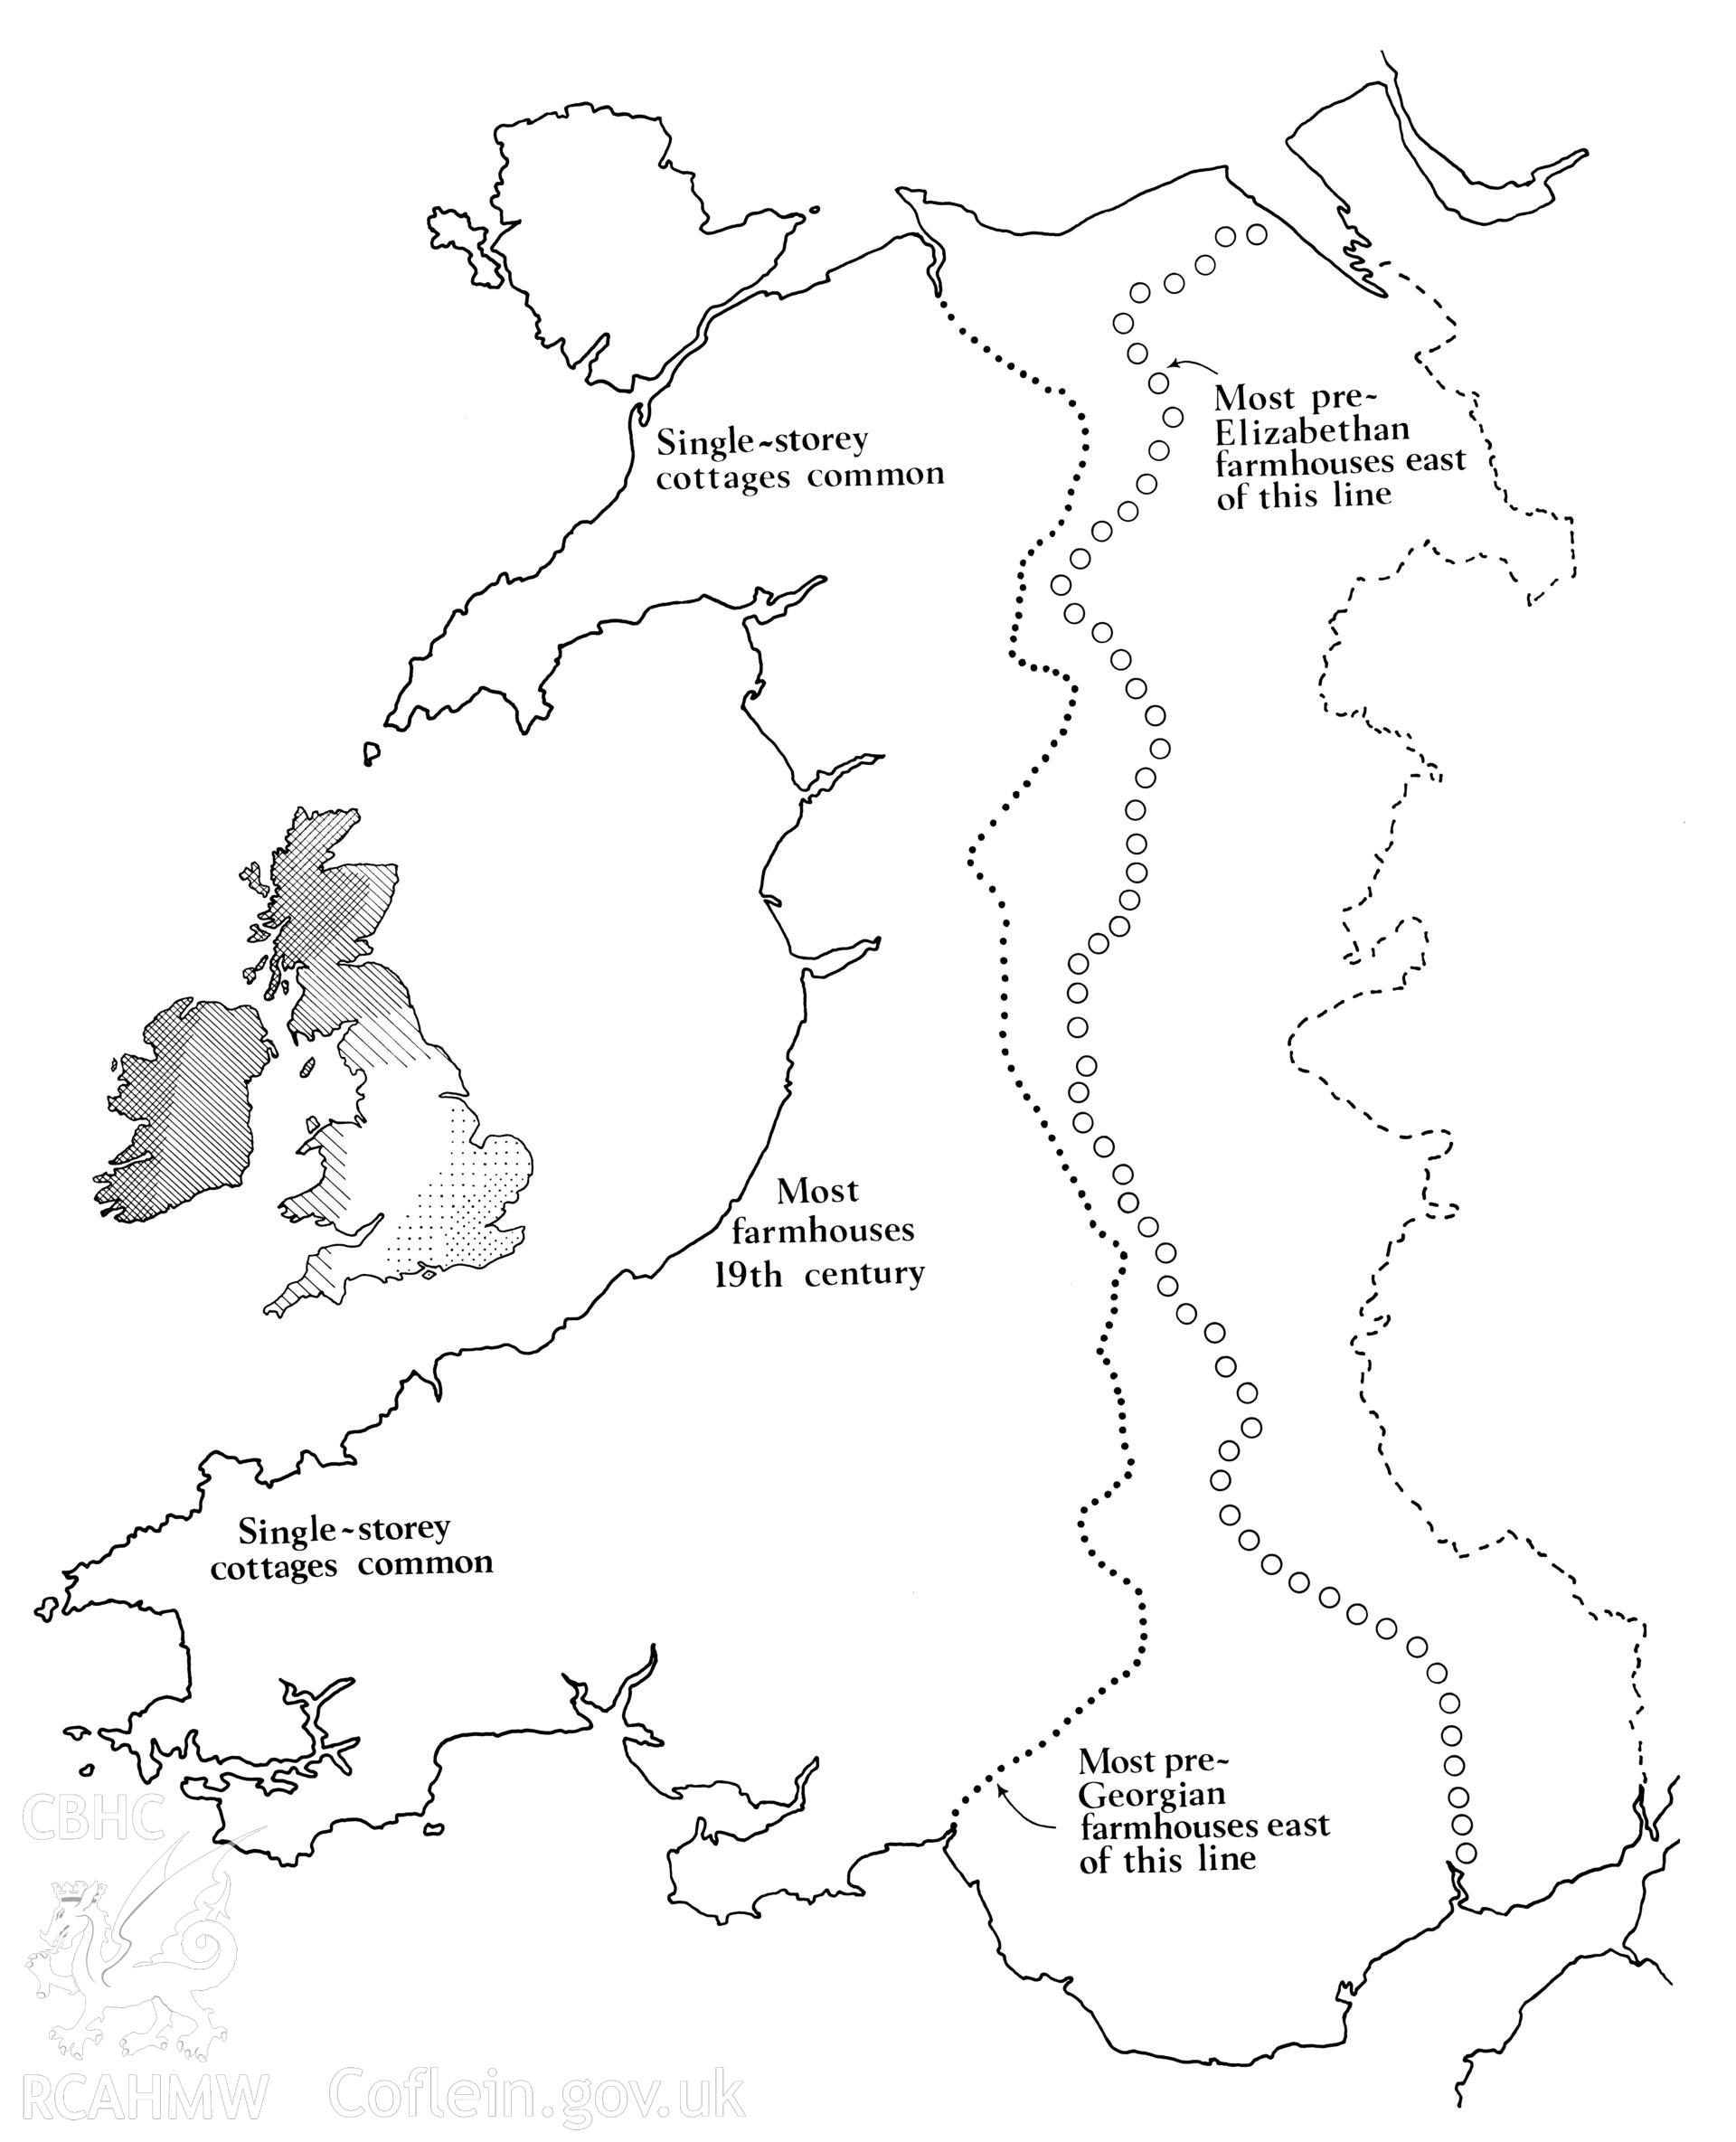 Volume 3, Figure 52: Map showing 'Welsh building regions according to date'.